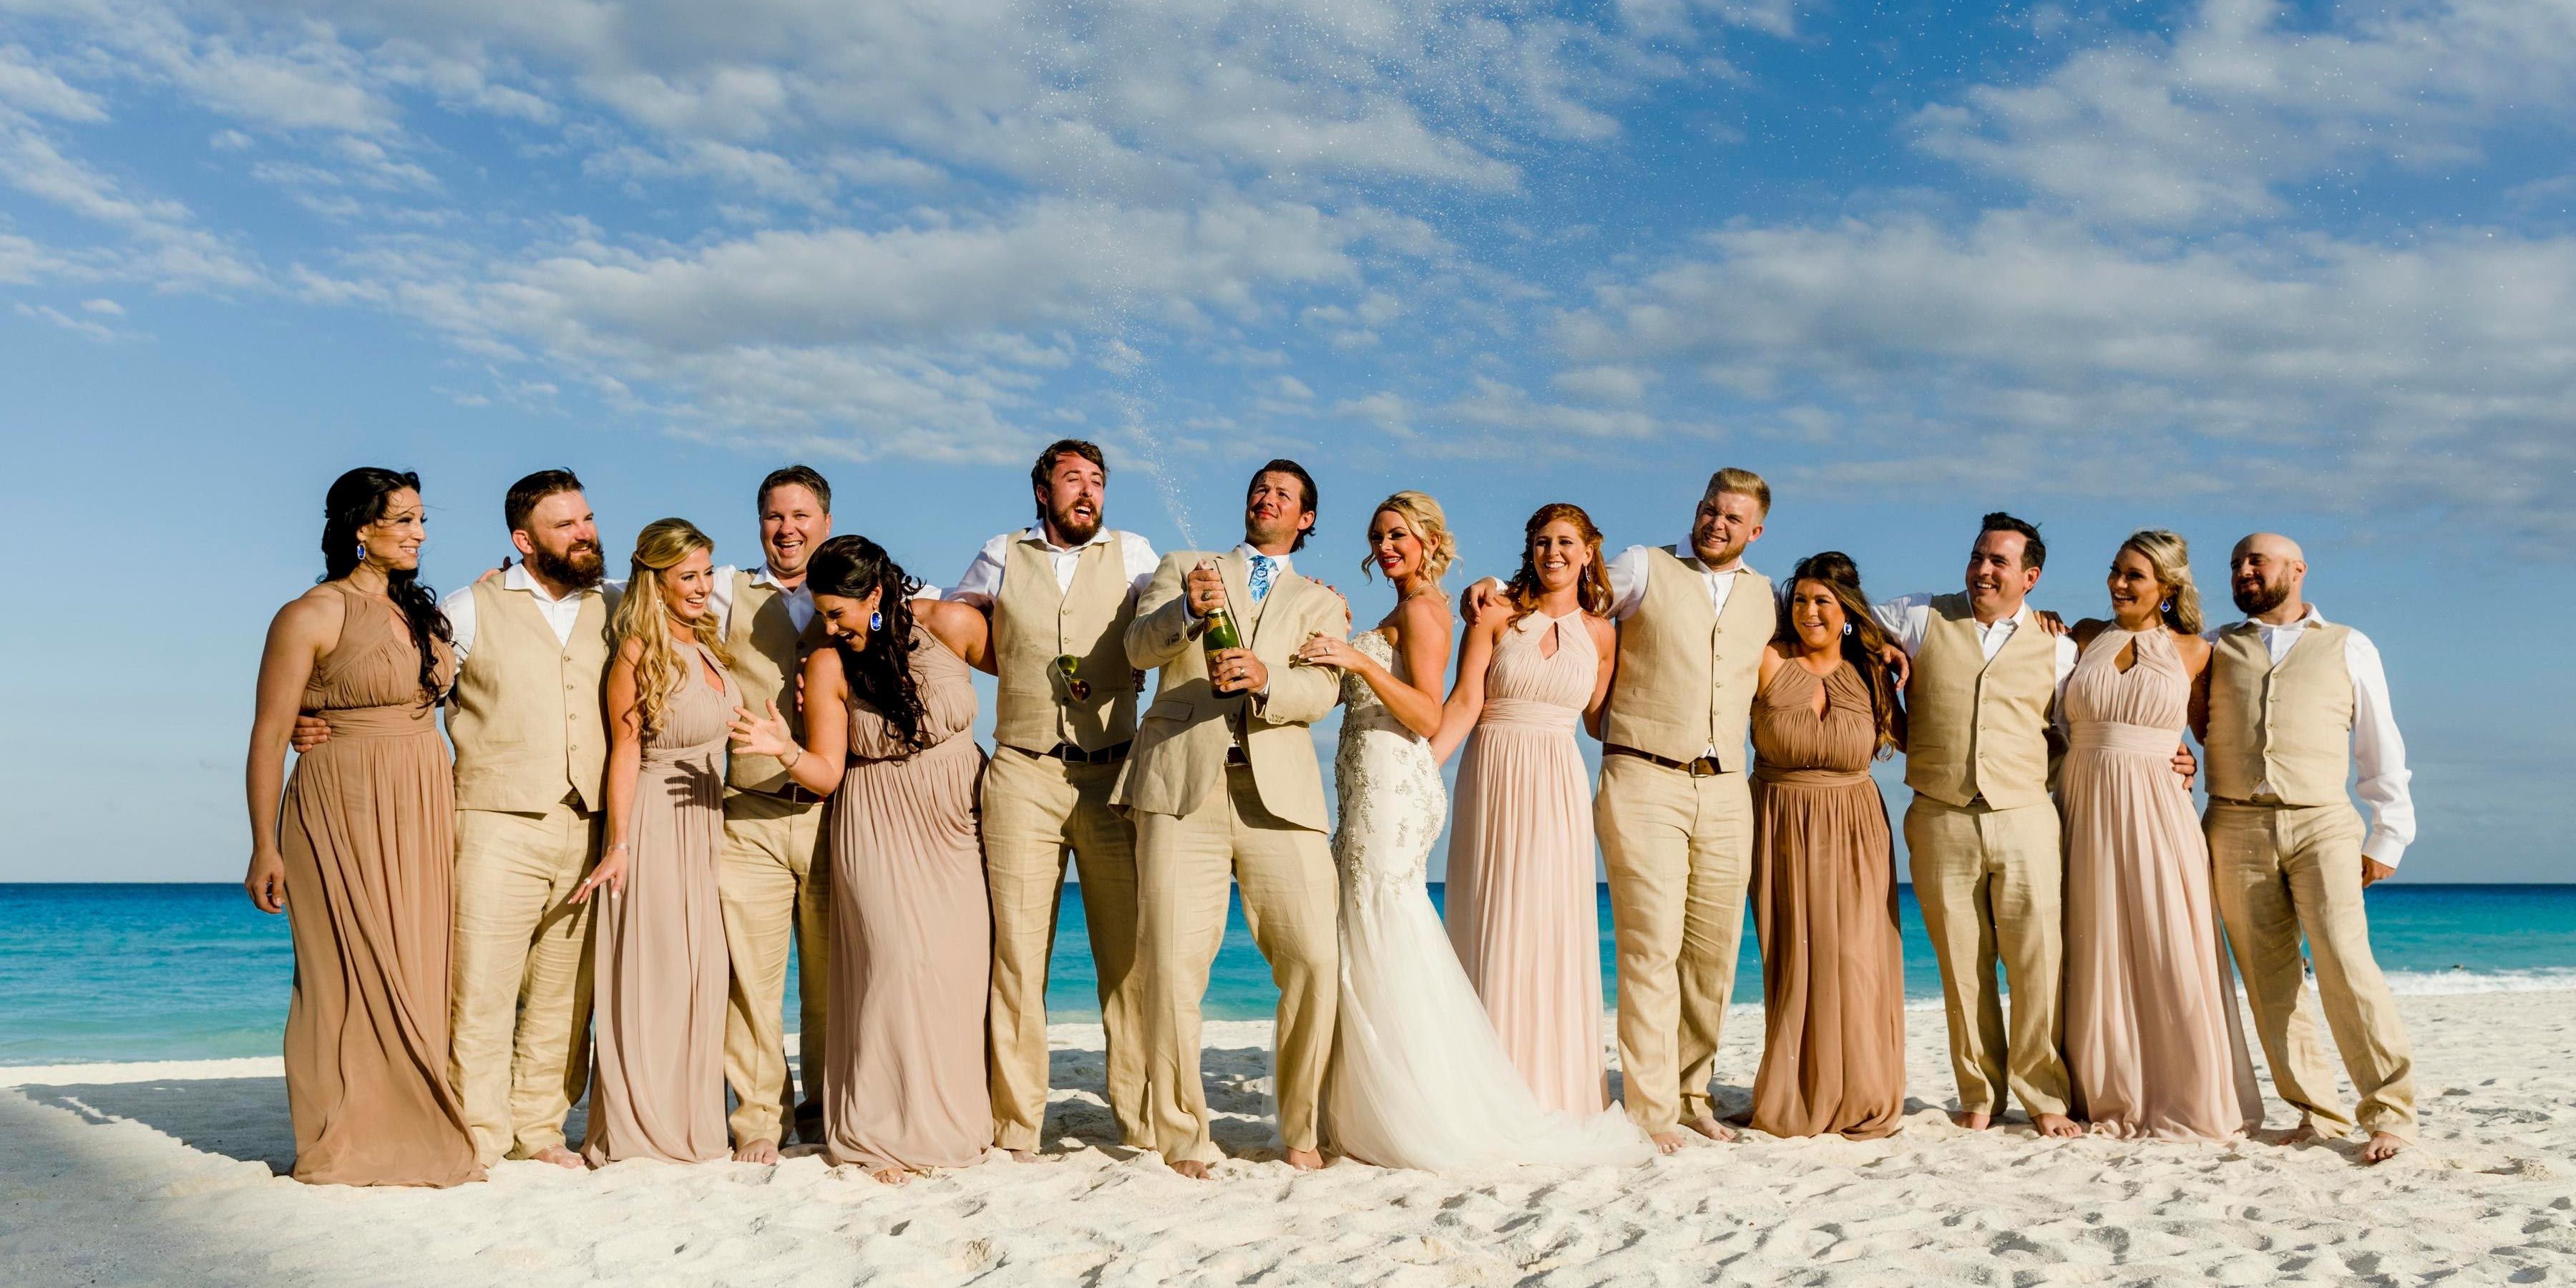 Real wedding group in the beach